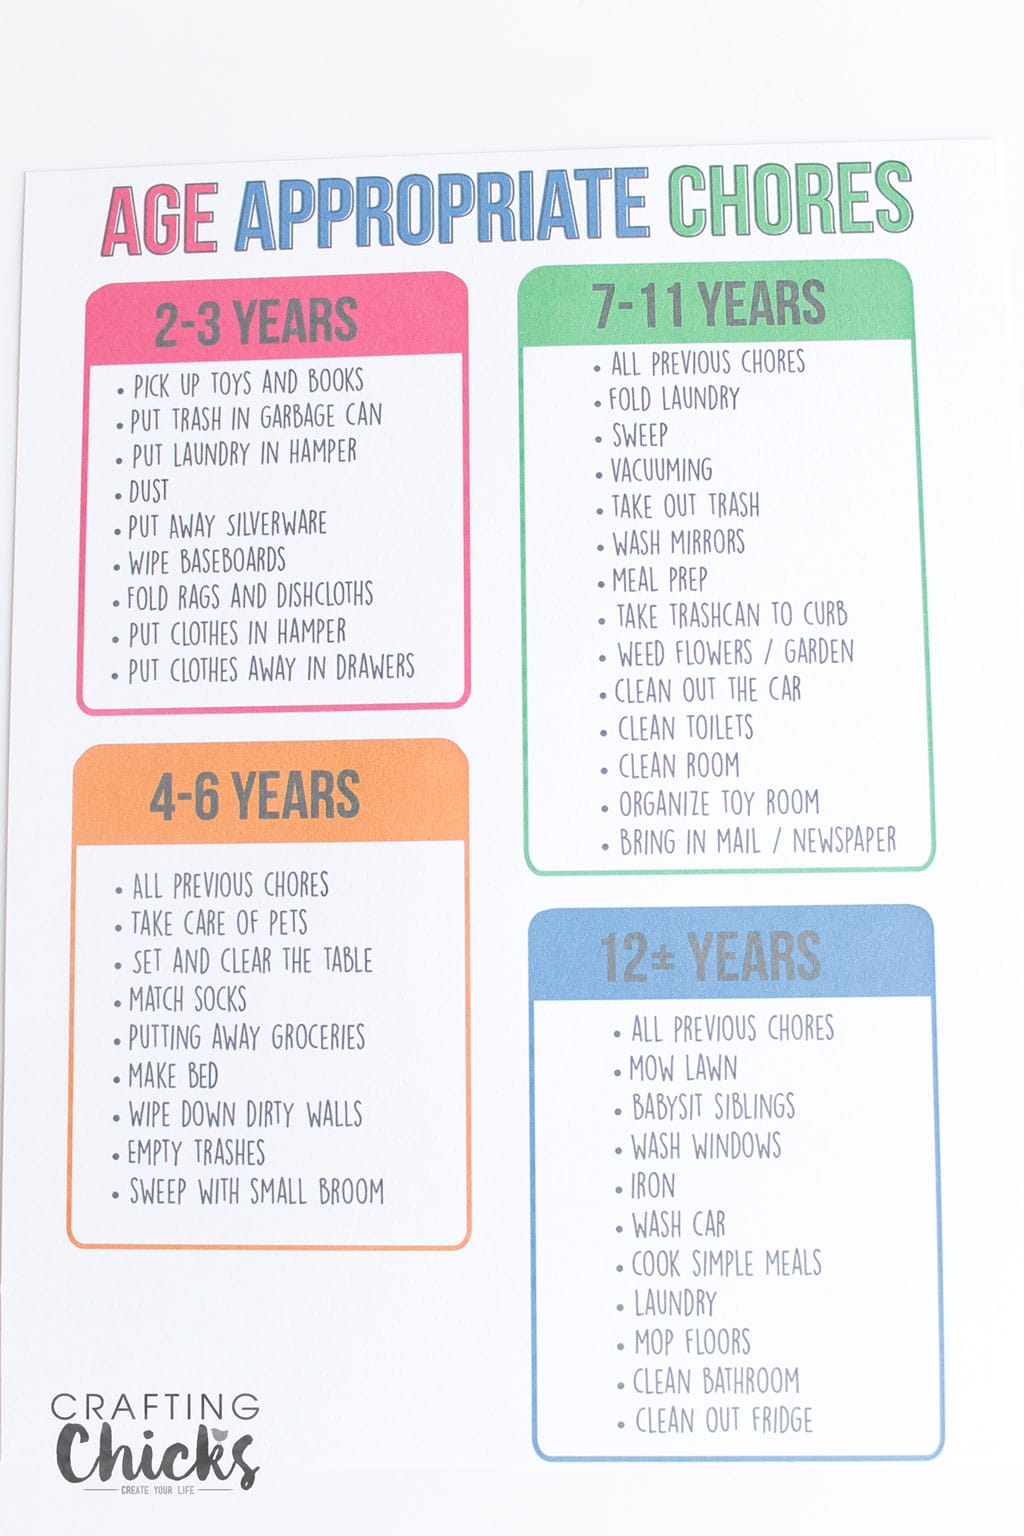 Age appropriate chores printable list